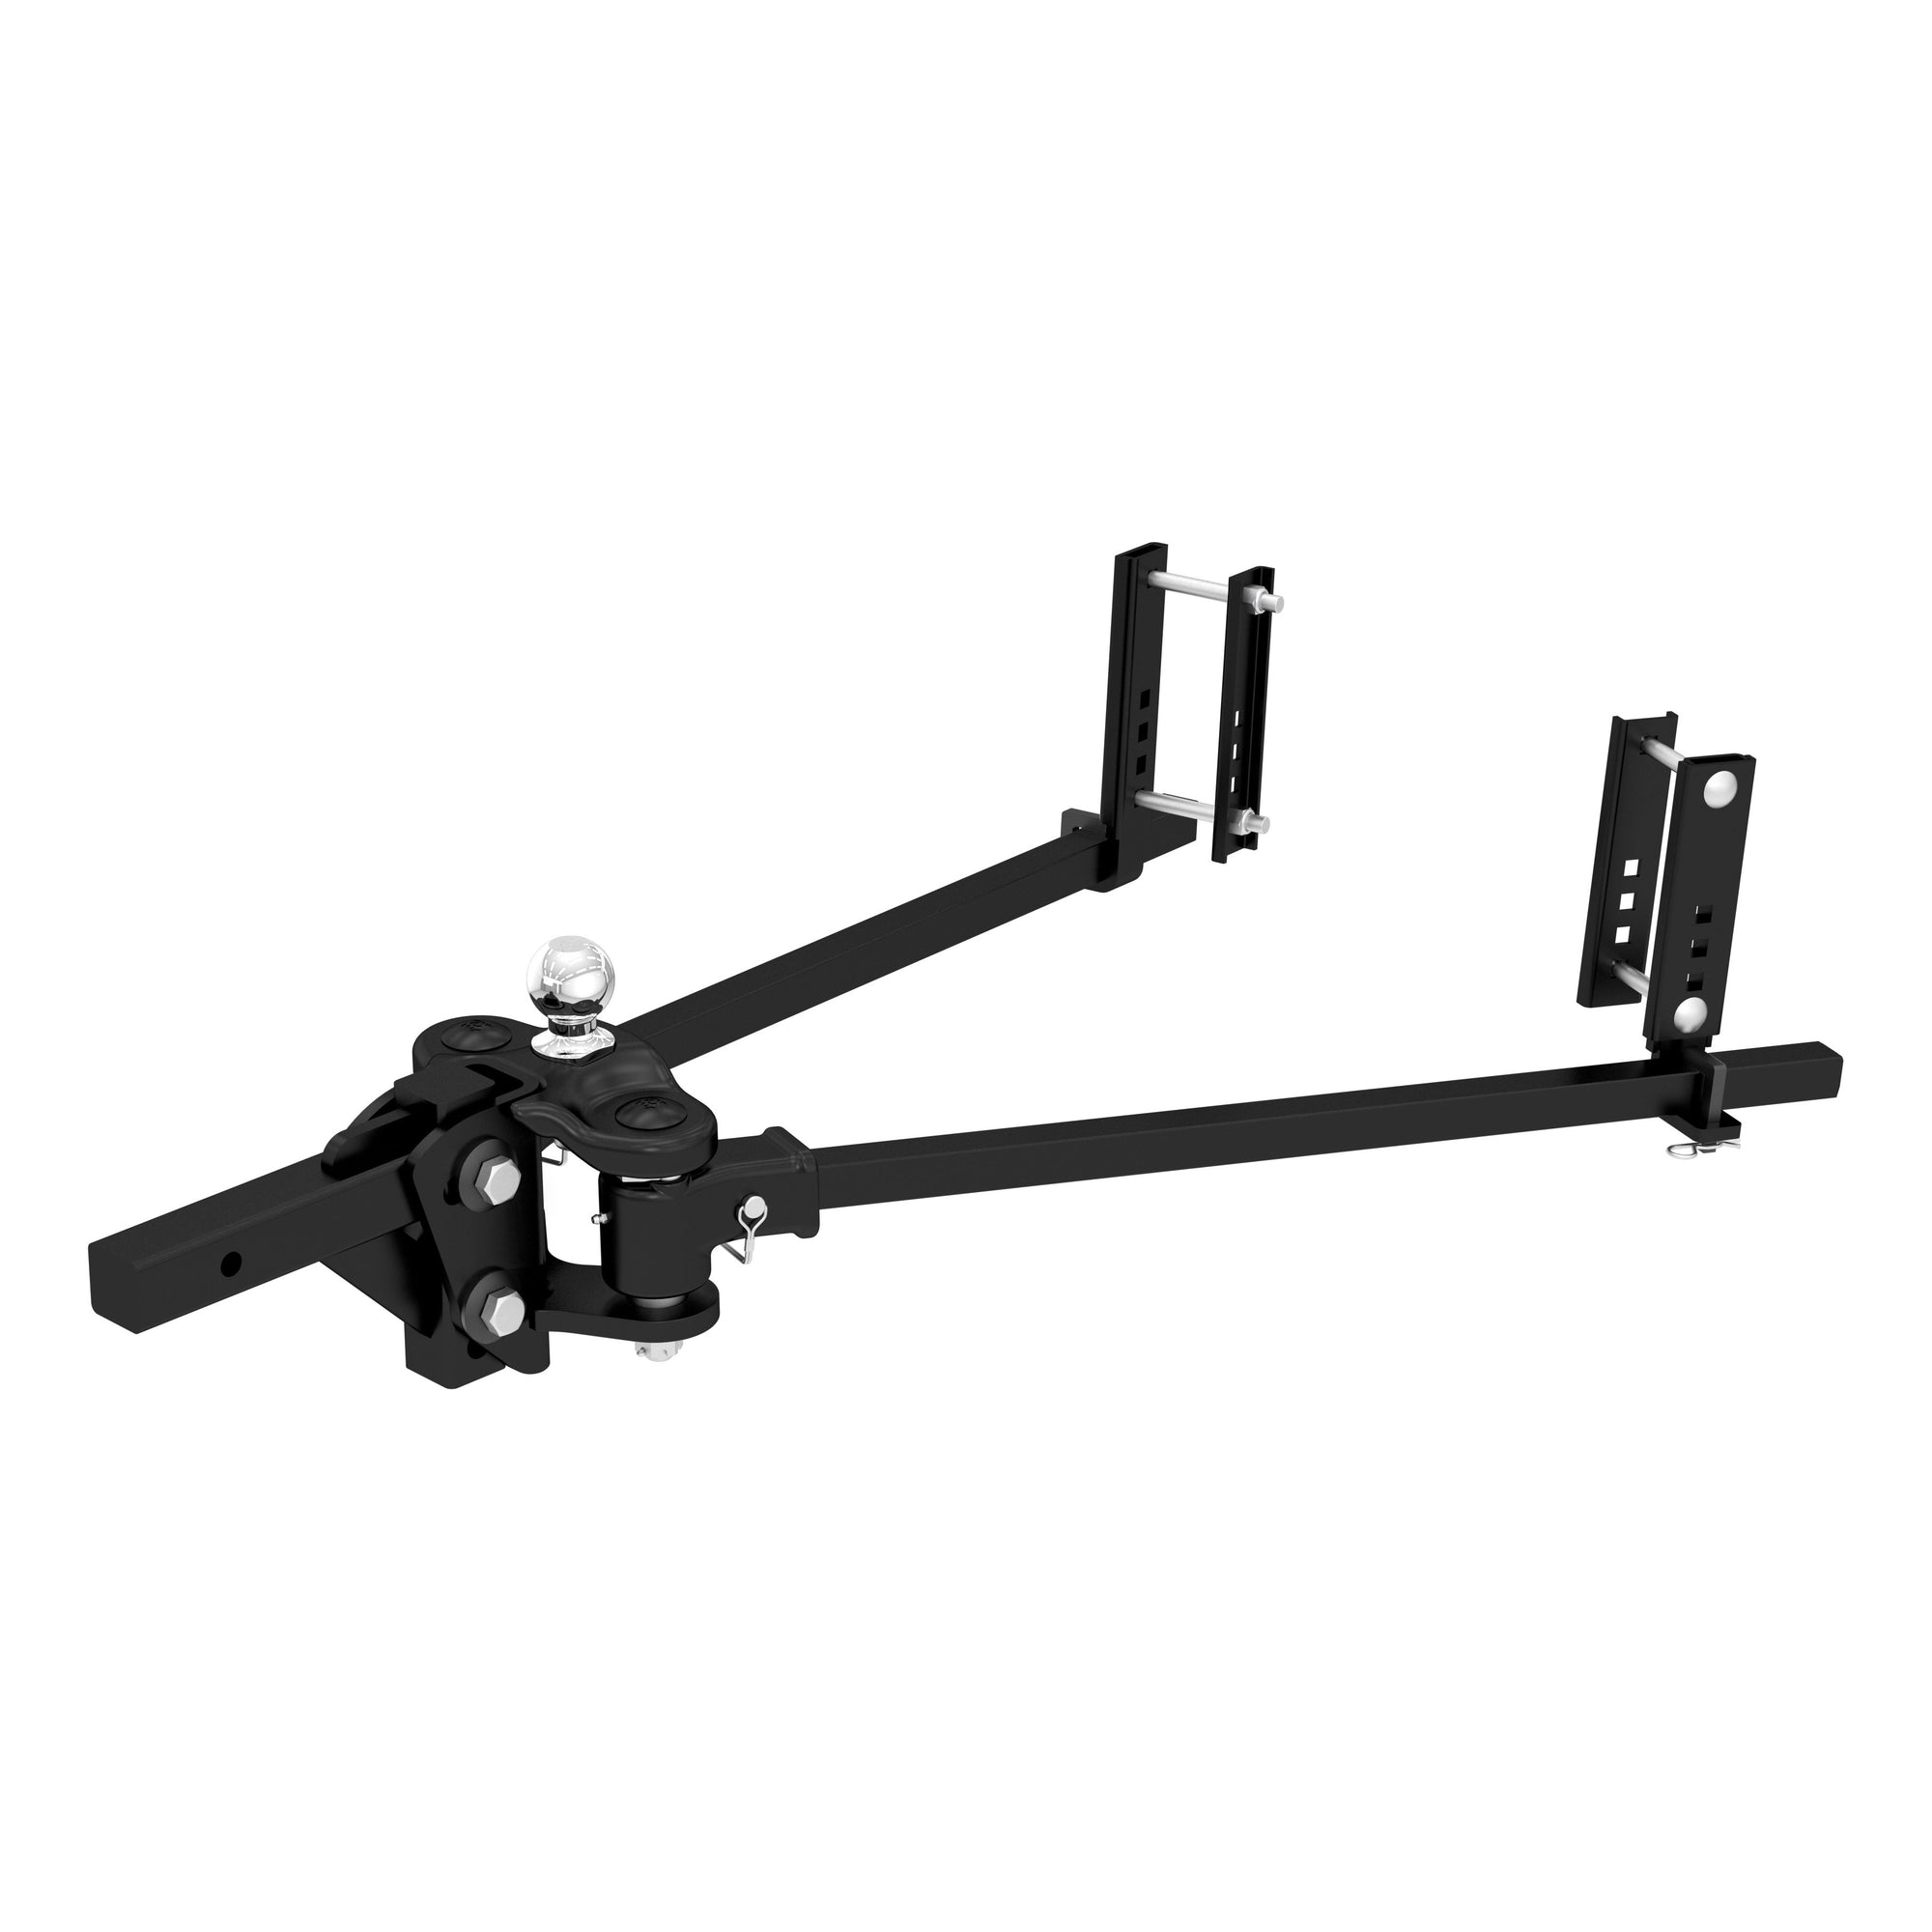 CURT 17501 TruTrack Weight Distribution Hitch with Sway Control, Up to 15K, 2" Shank, 2-5/16" Ball